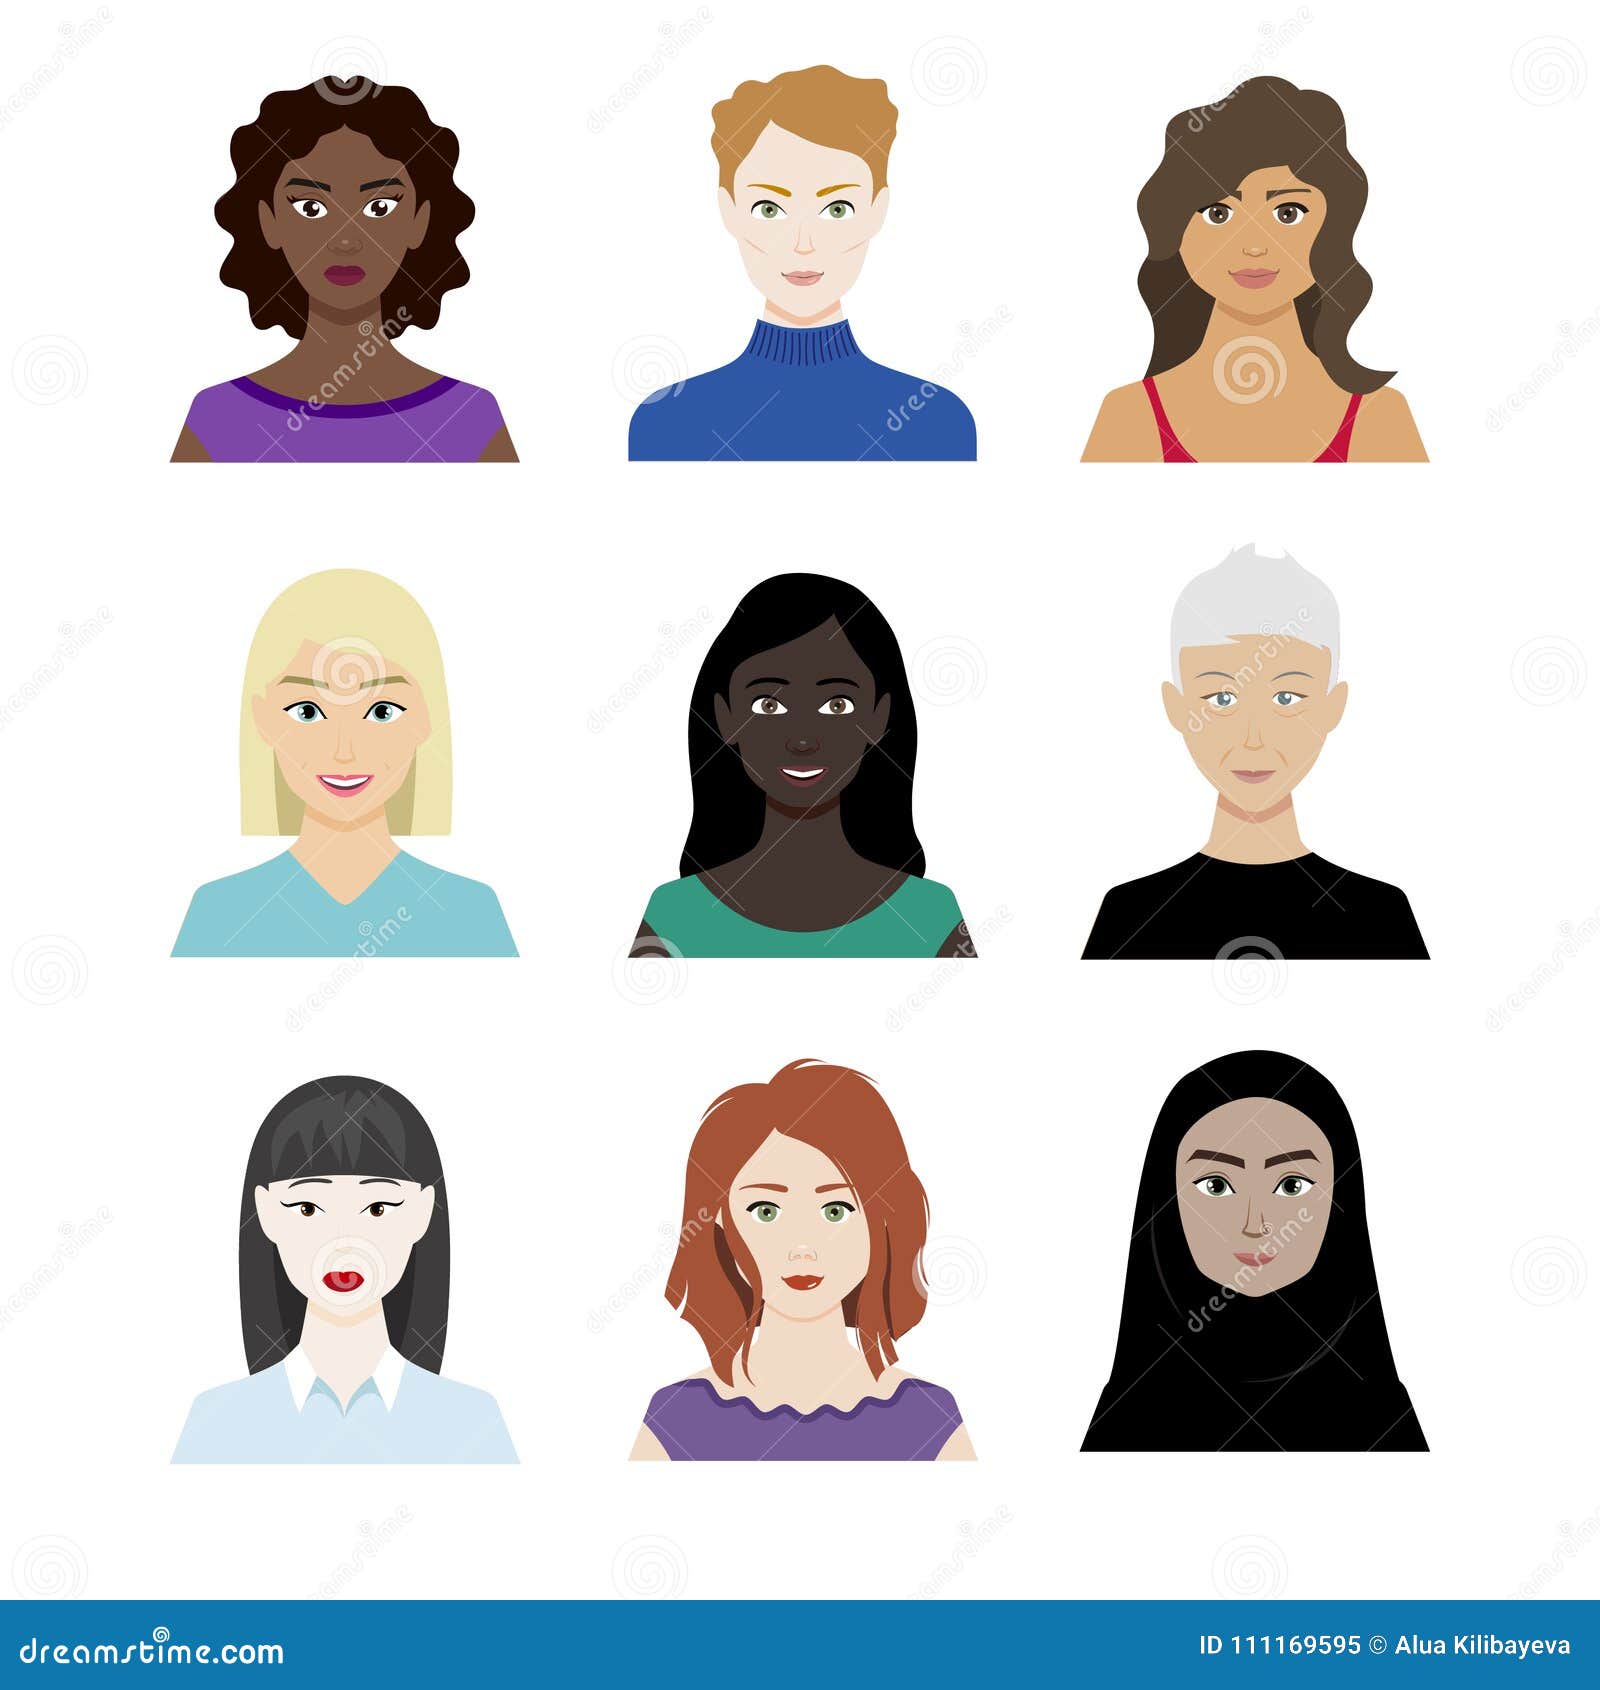 female characters of different races and ages